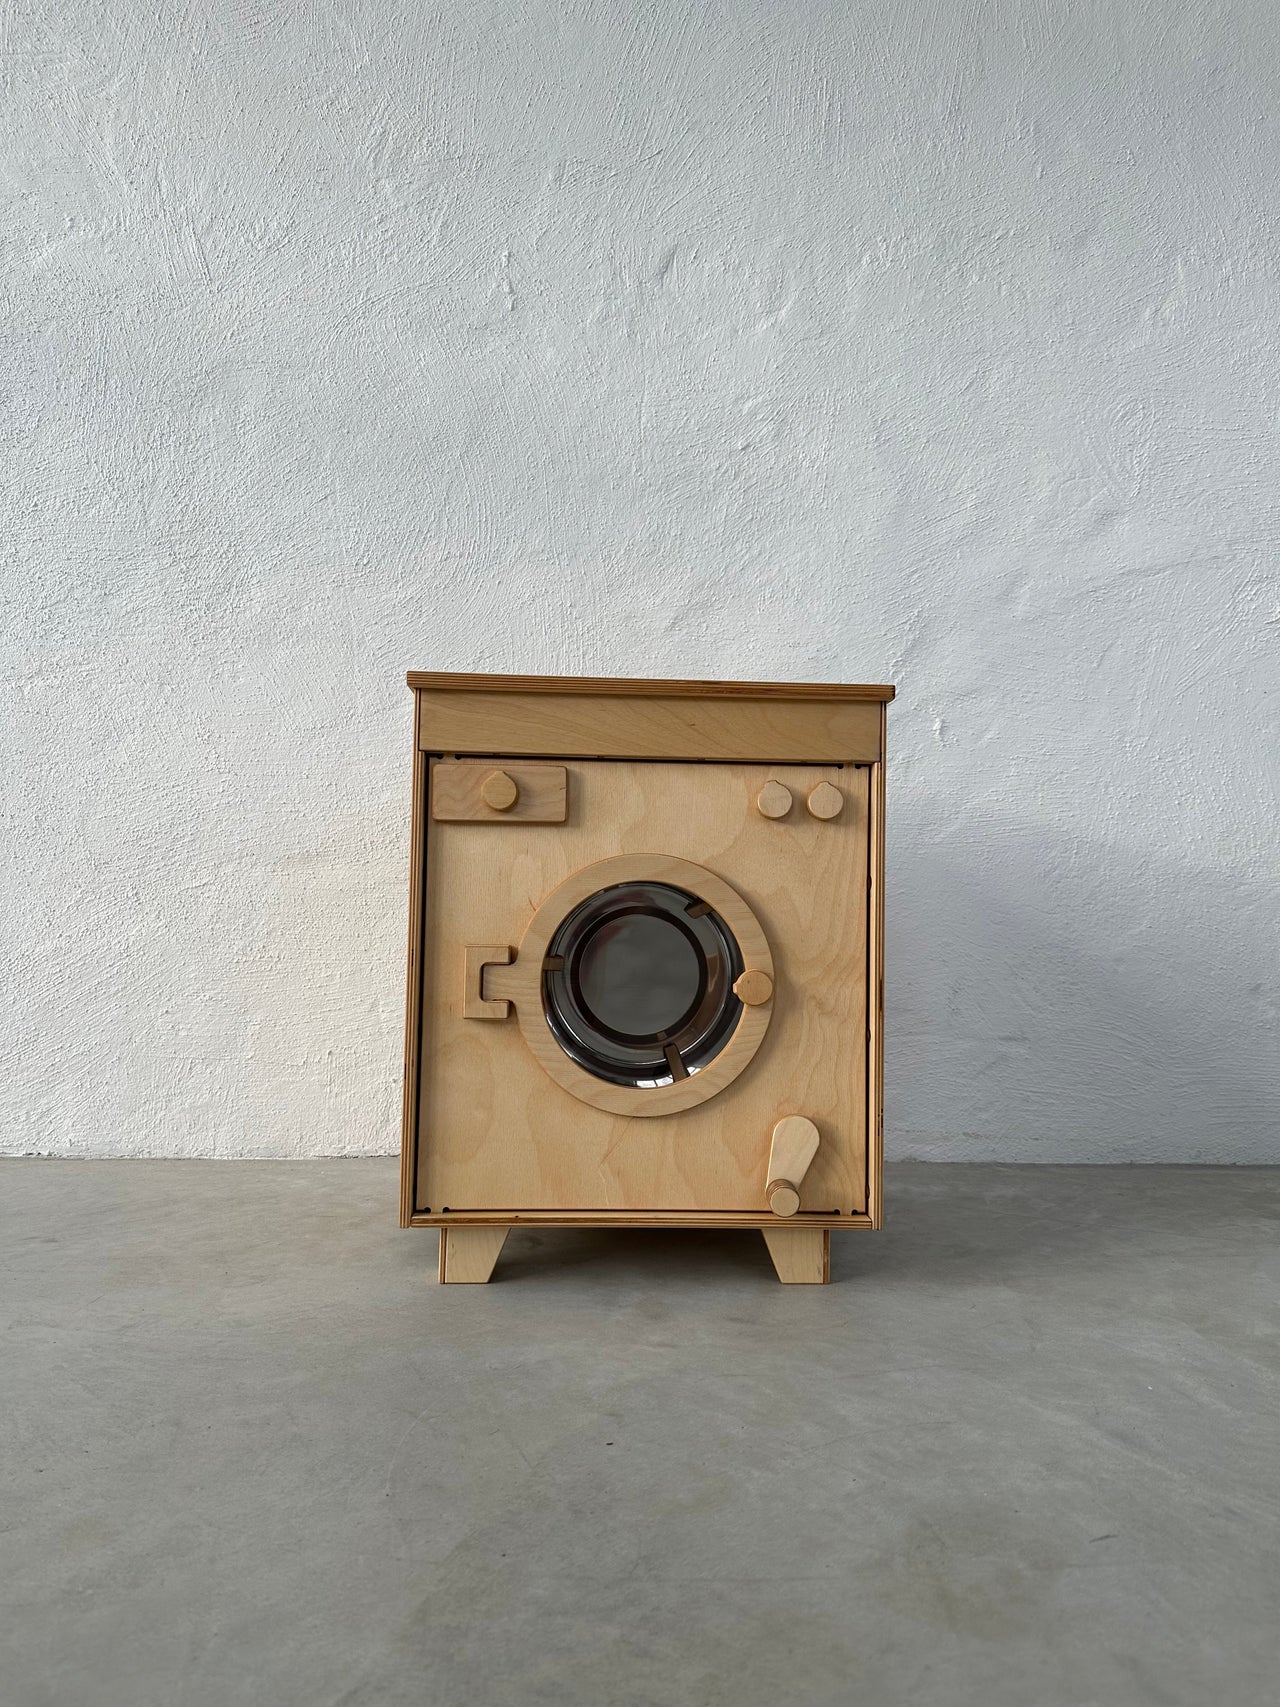 Wooden Washing Machine - Natural Wood - MIDMINI - Handcrafted wooden toys for generations.